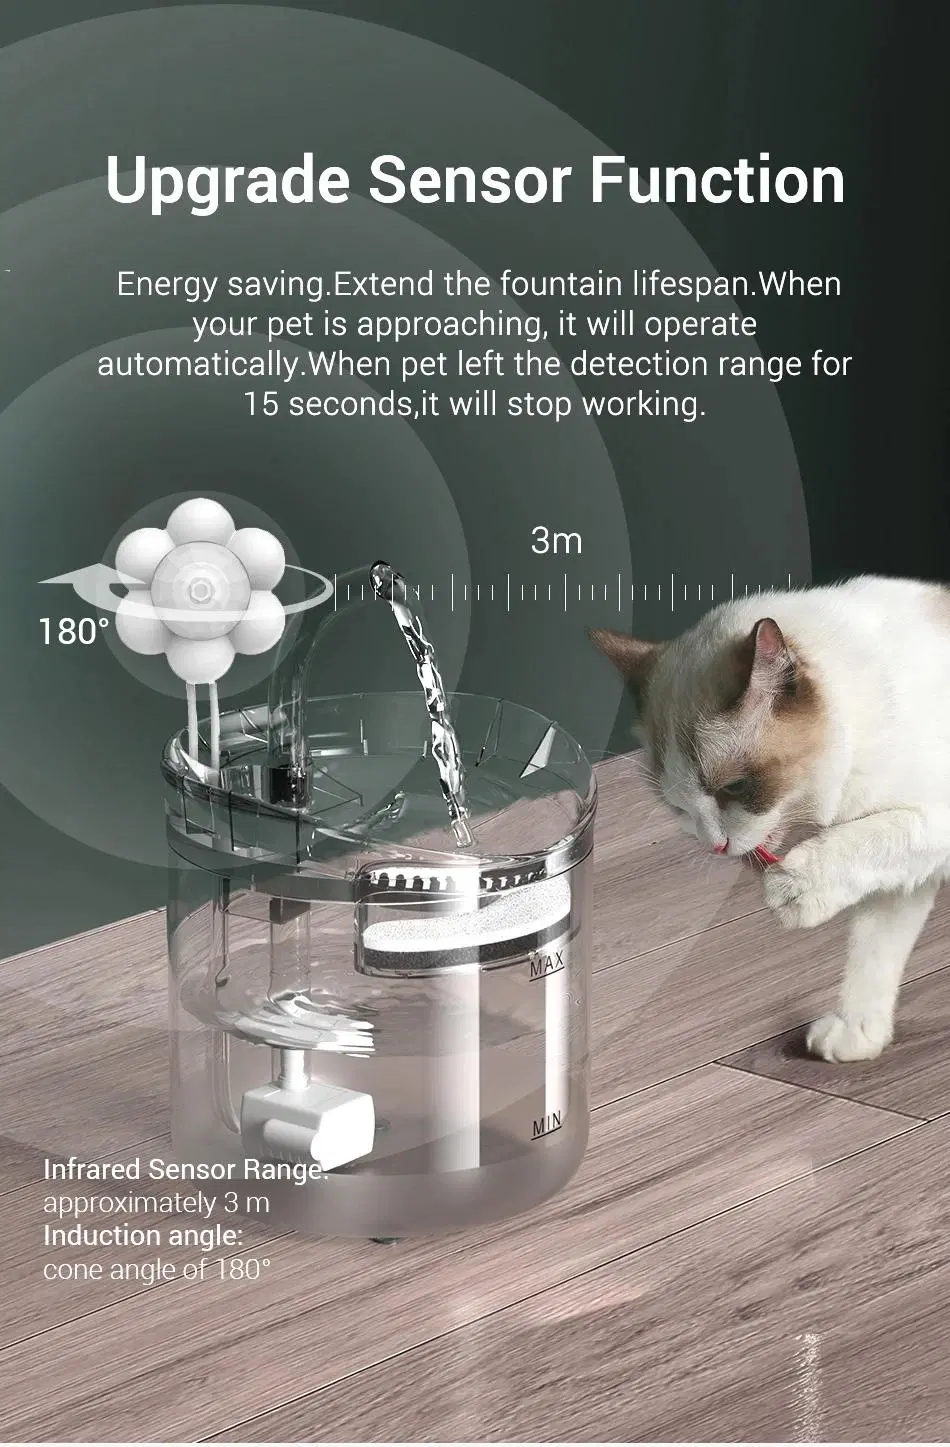 Small But Smart 2L Infrared Inductive Cat Pet Water Dispenser 5V Rechargeable 5000mAh Last for up to 730hrs